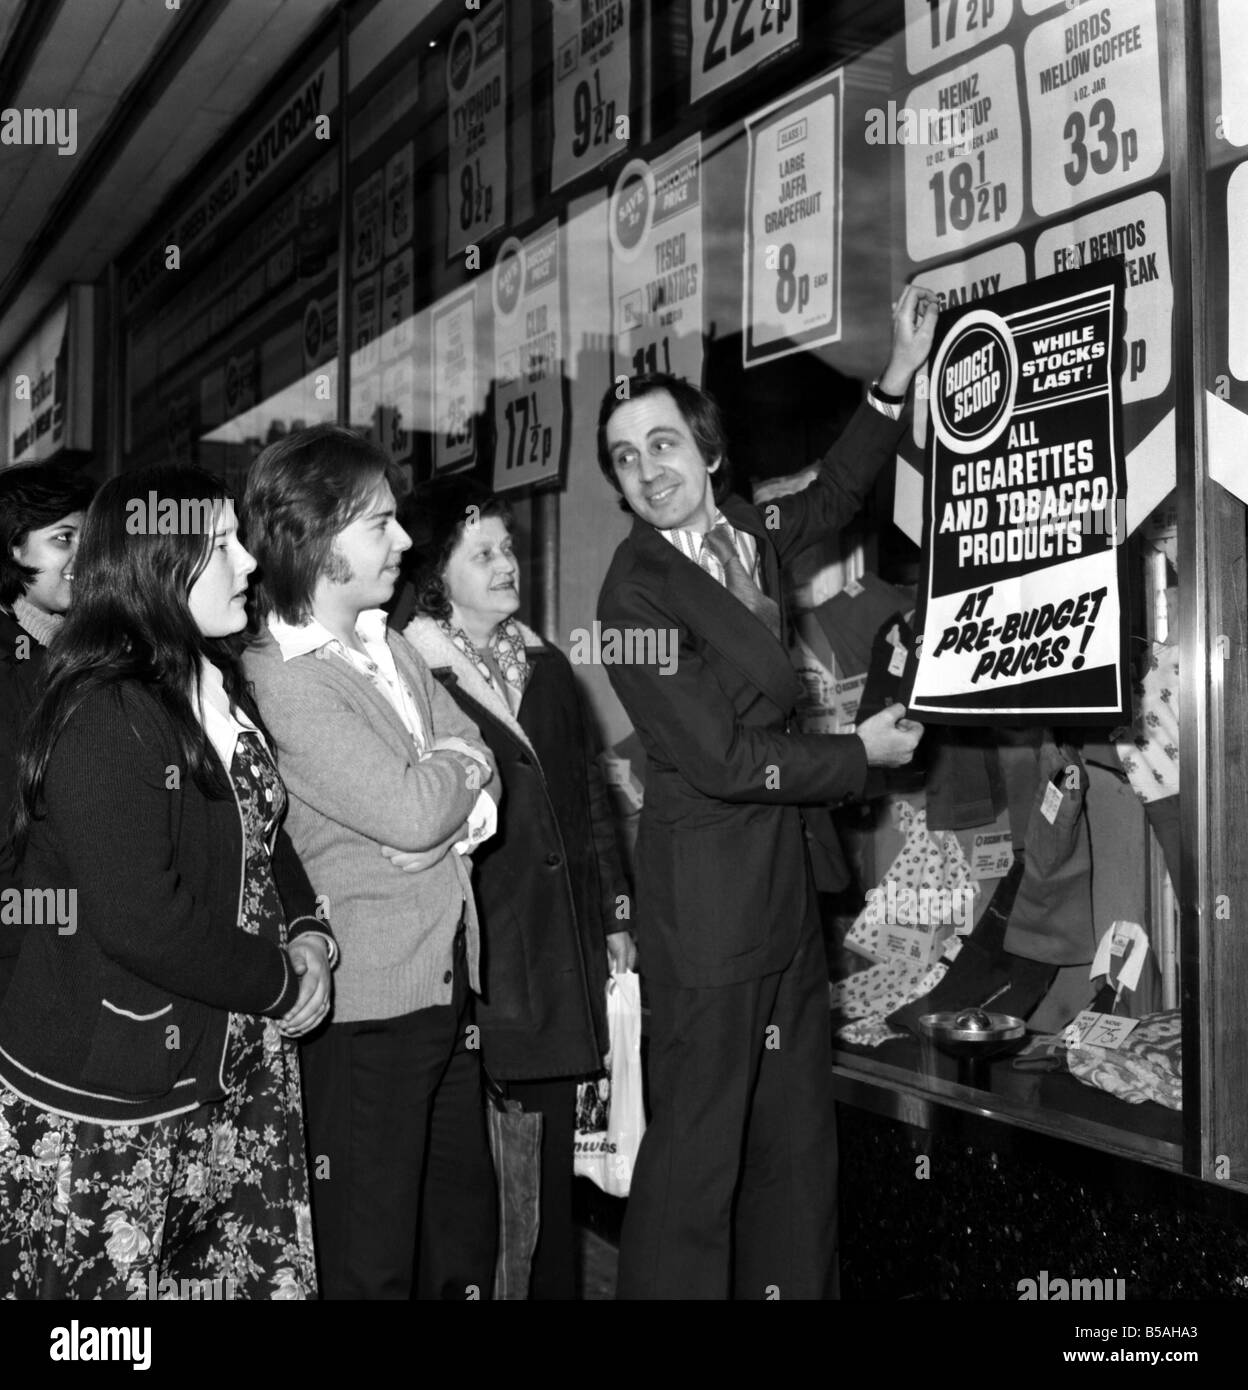 Tesco supervisor Tony Dobbin puts up 'pre-budget prices' posters on one of the company's stores in Camden High Street, London N.W.1. April 1975 Stock Photo